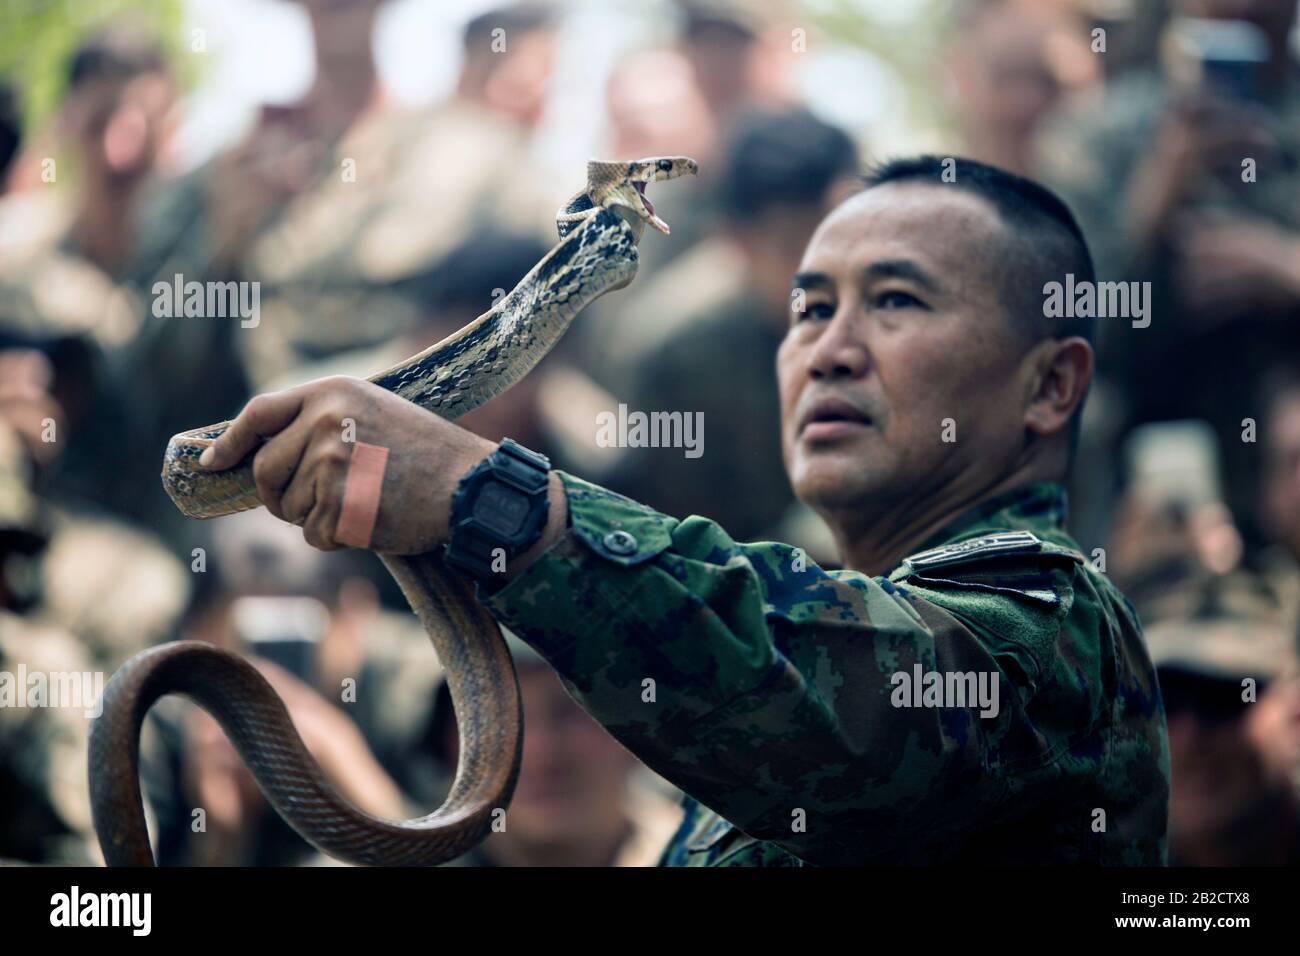 Ban Chan Khrem, Thailand. 02nd Mar, 2020. Royal Thai Marine CPO First Class Pairoj Prasarnsai handles a king cobra as part of jungle survival training during exercise Cobra Gold 2020 March 2, 2020 in Ban Chan Khrem, Chanthaburi, Thailand. The Marines learned essential skills necessary for surviving in a jungle environment, such as making a fire, eating plants and alternative ways to stay hydrated. Credit: Jordan E. Gilbert/Planetpix/Alamy Live News Credit: Planetpix/Alamy Live News Stock Photo